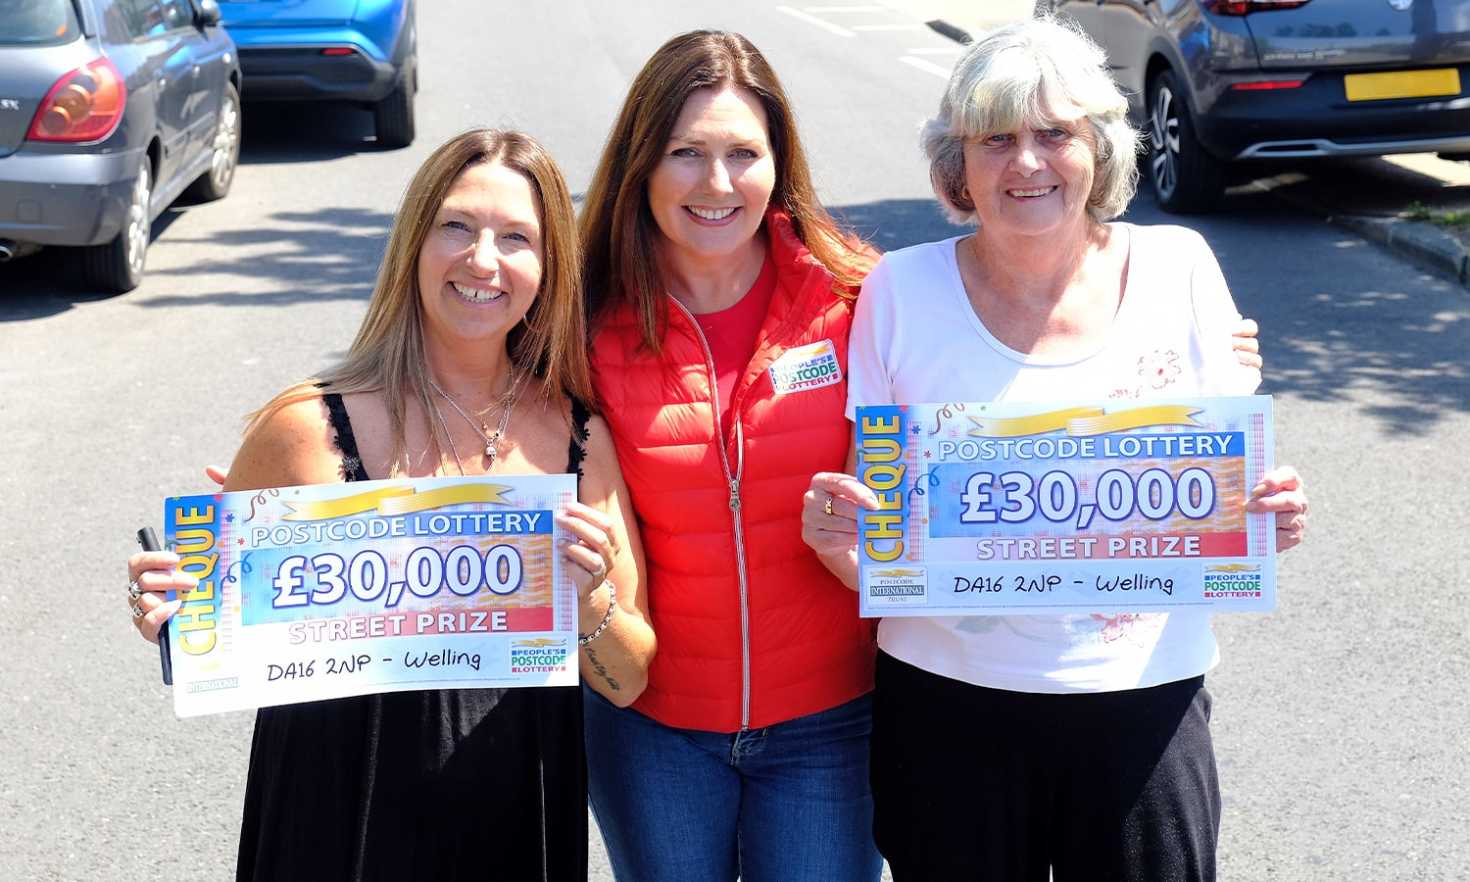 Judie is in Welling celebrating with today's Street Prize winners